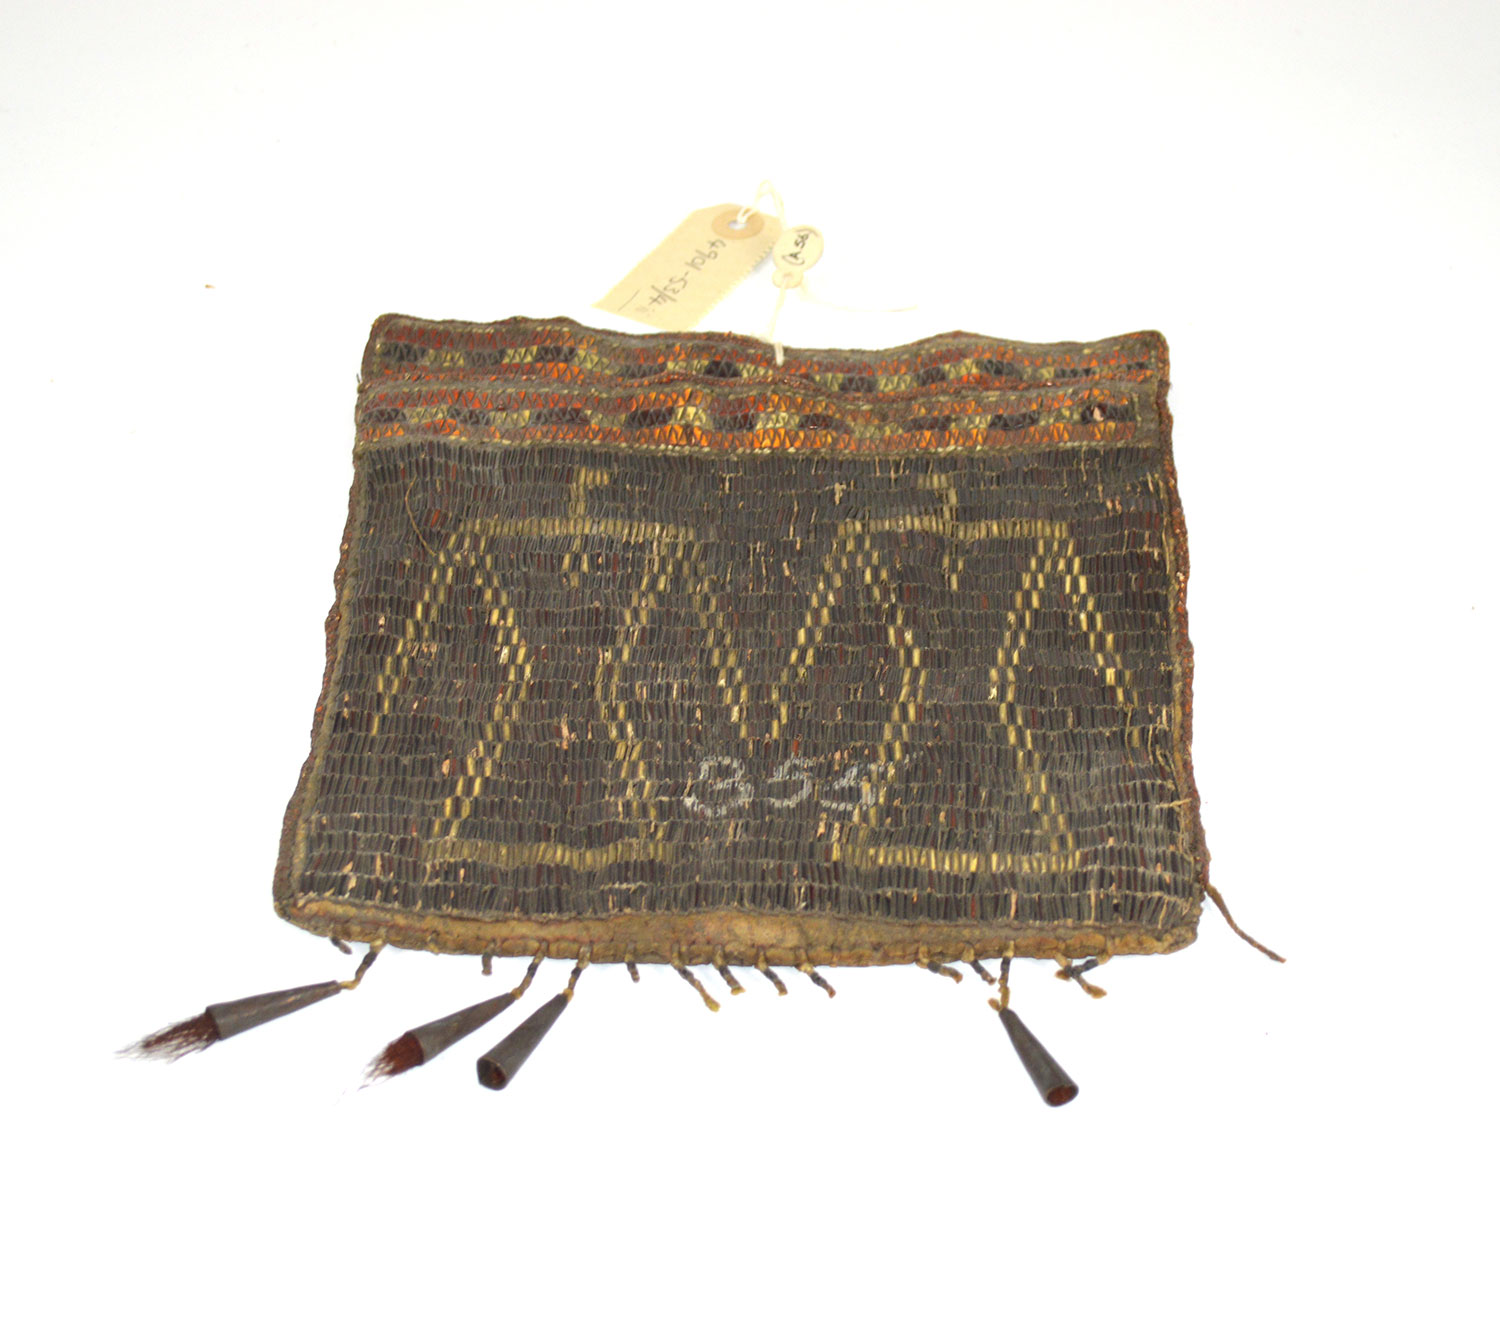 Algonquian bag decorated with porcupine quillwork of double thunderbird design, late 18th-mid 19th century. The number 355 may relate to numbers used in the model room, which comprised of the earliest collections in what is now the Royal Engineers Museum. This bag was mistakenly associated with South African collections until the 1990s. © Royal Engineers Museum, Library and Archive.